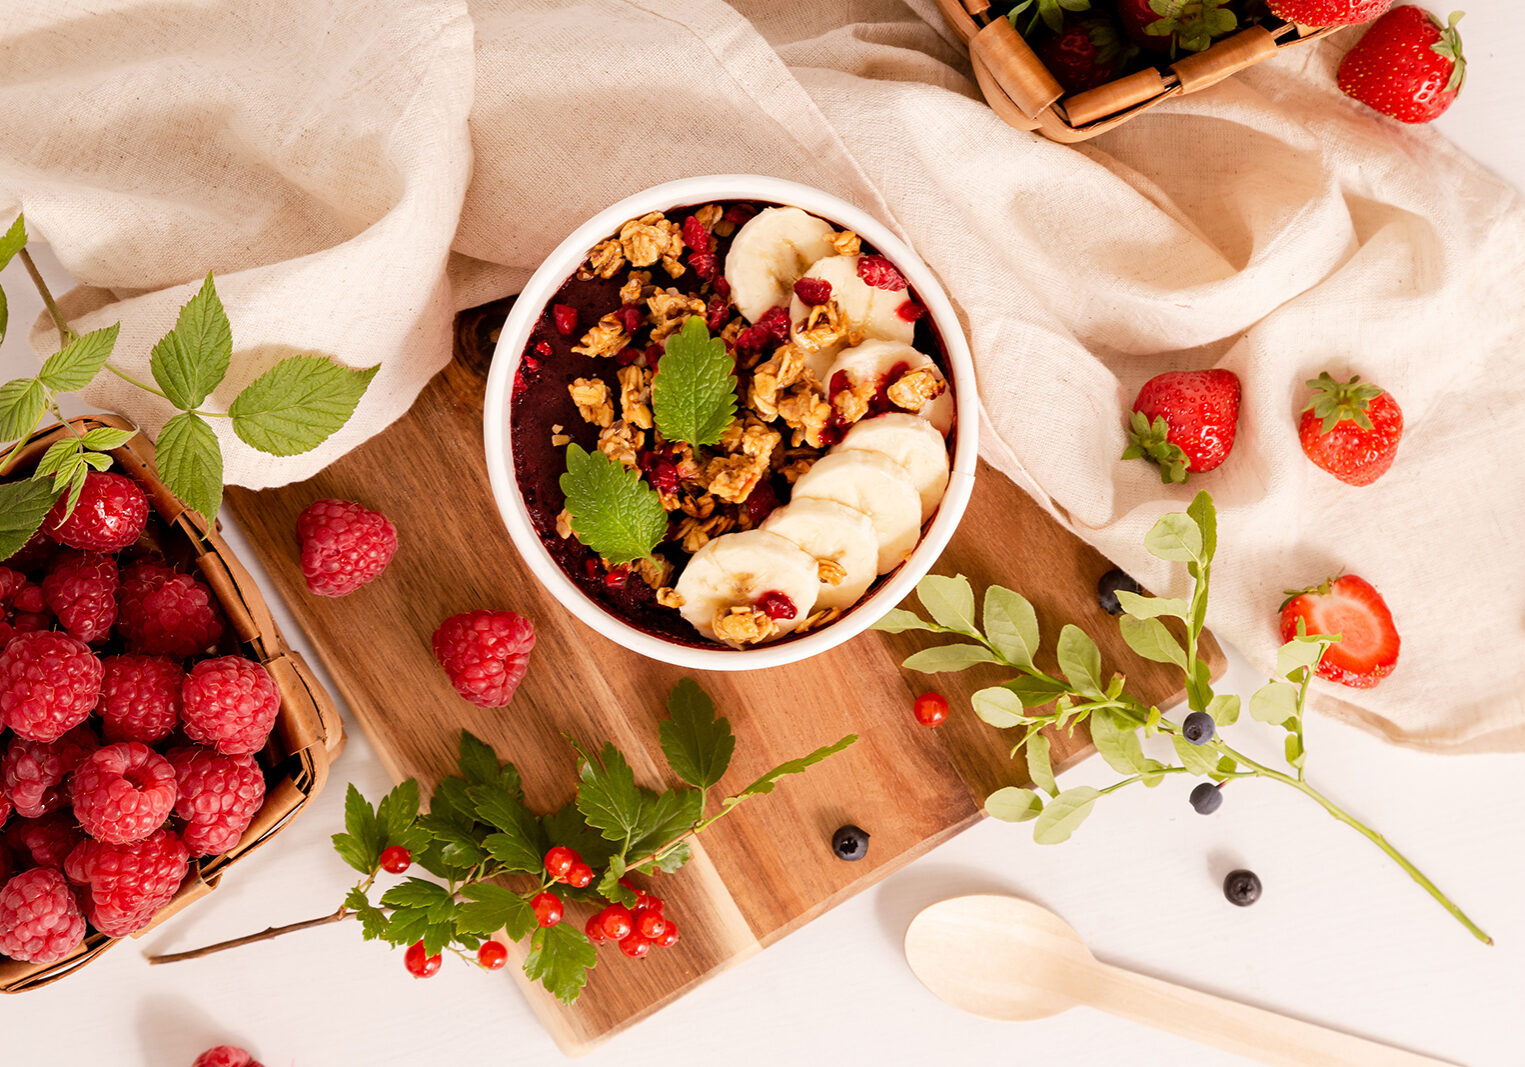 Food photography of a decorative smoothie bowl for a Finnish coffee chain focused on serving dishes with traditional Finnish berries found in forests.